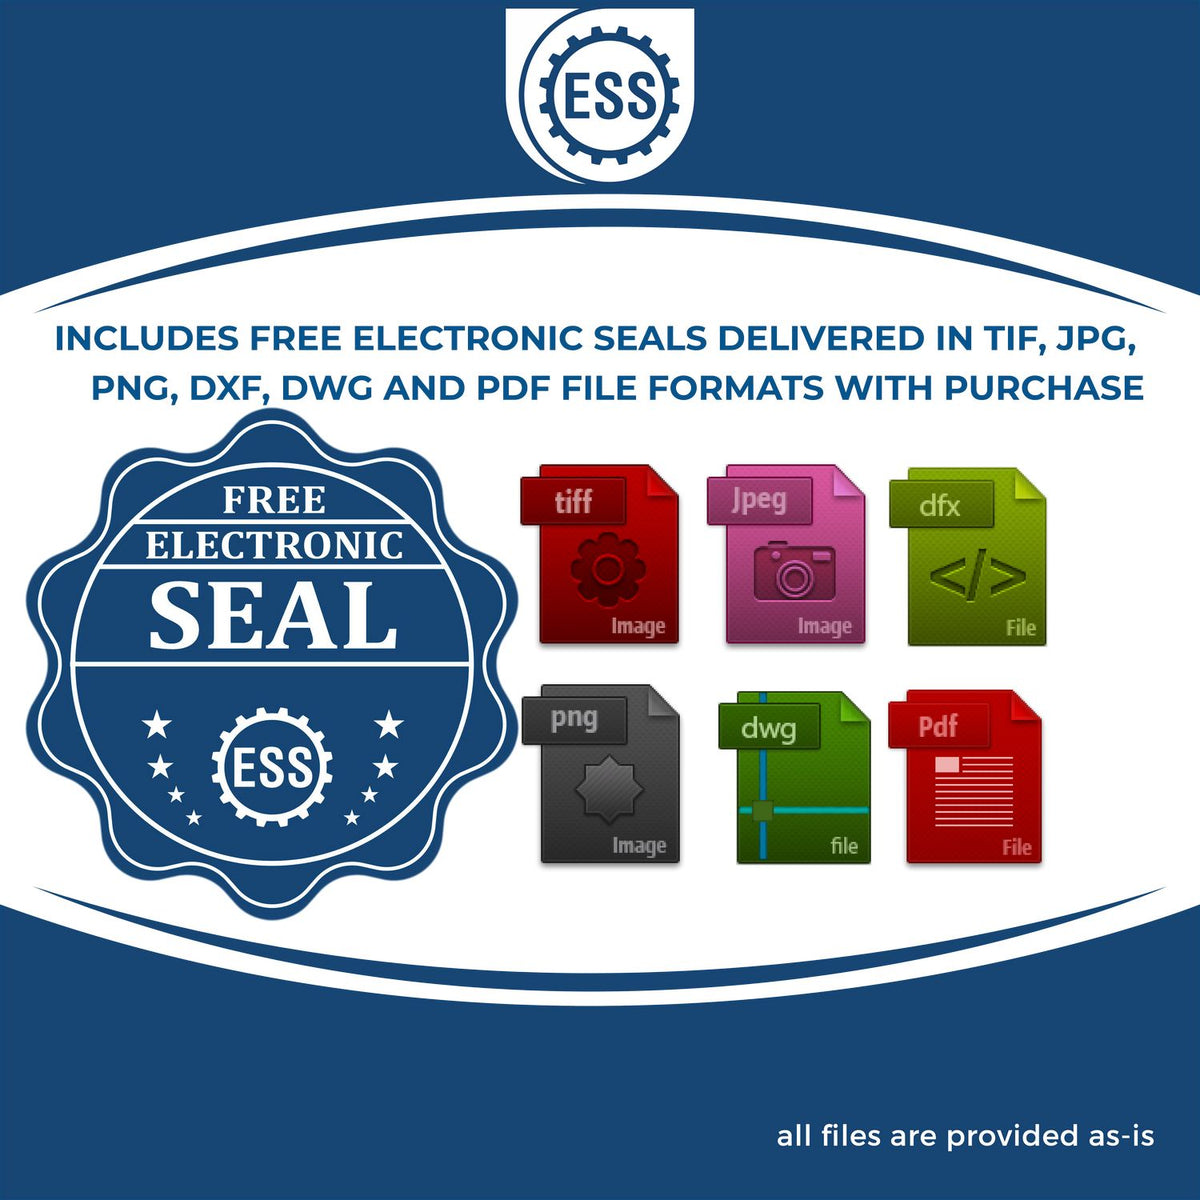 An infographic for the free electronic seal for the Heavy Duty Cast Iron Iowa Architect Embosser illustrating the different file type icons such as DXF, DWG, TIF, JPG and PNG.